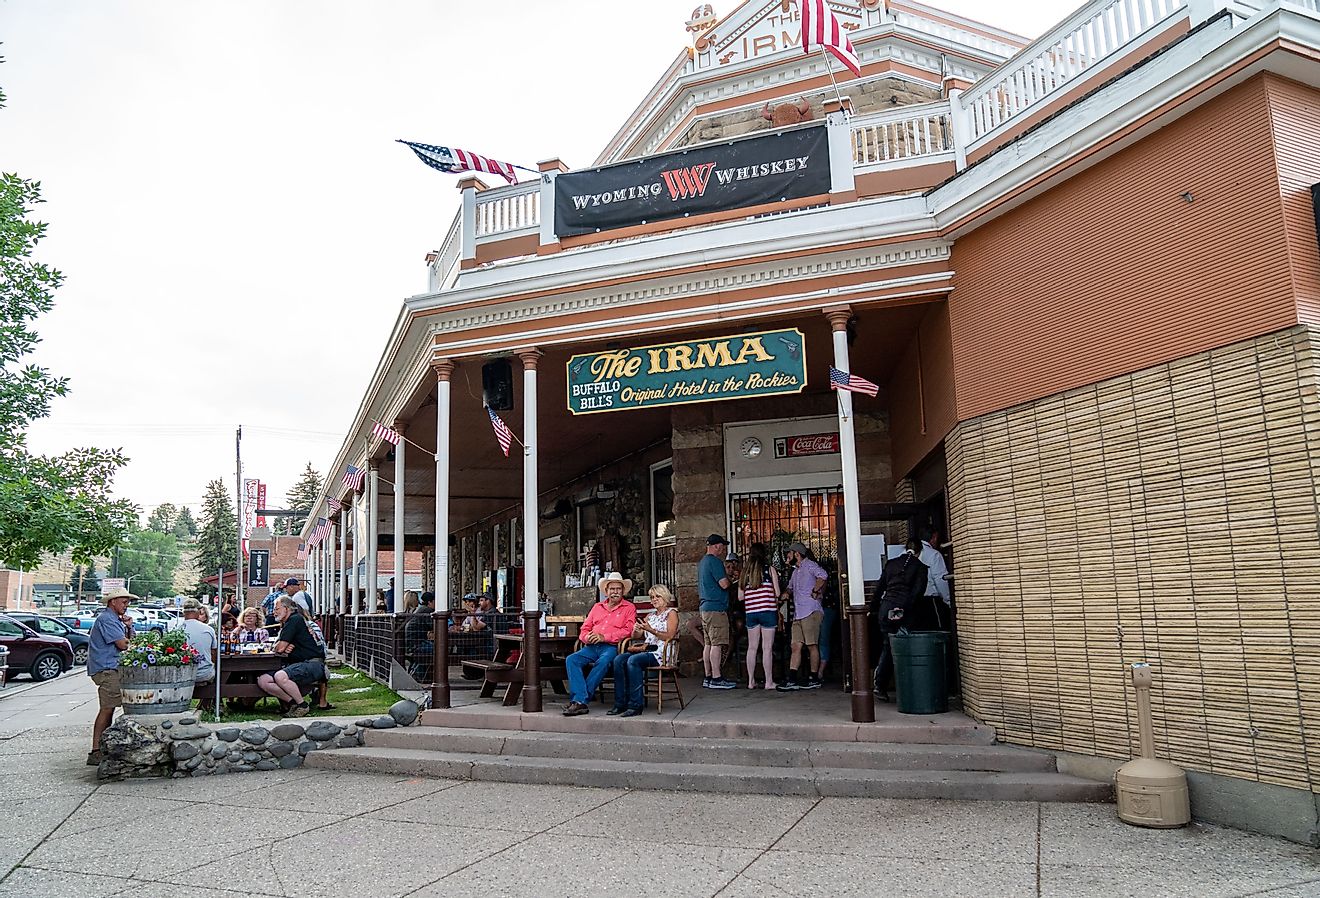 People gather outside the famous Irma Restaurant and grill in Cody, Wyoming. Image credit melissamn via Shutterstock